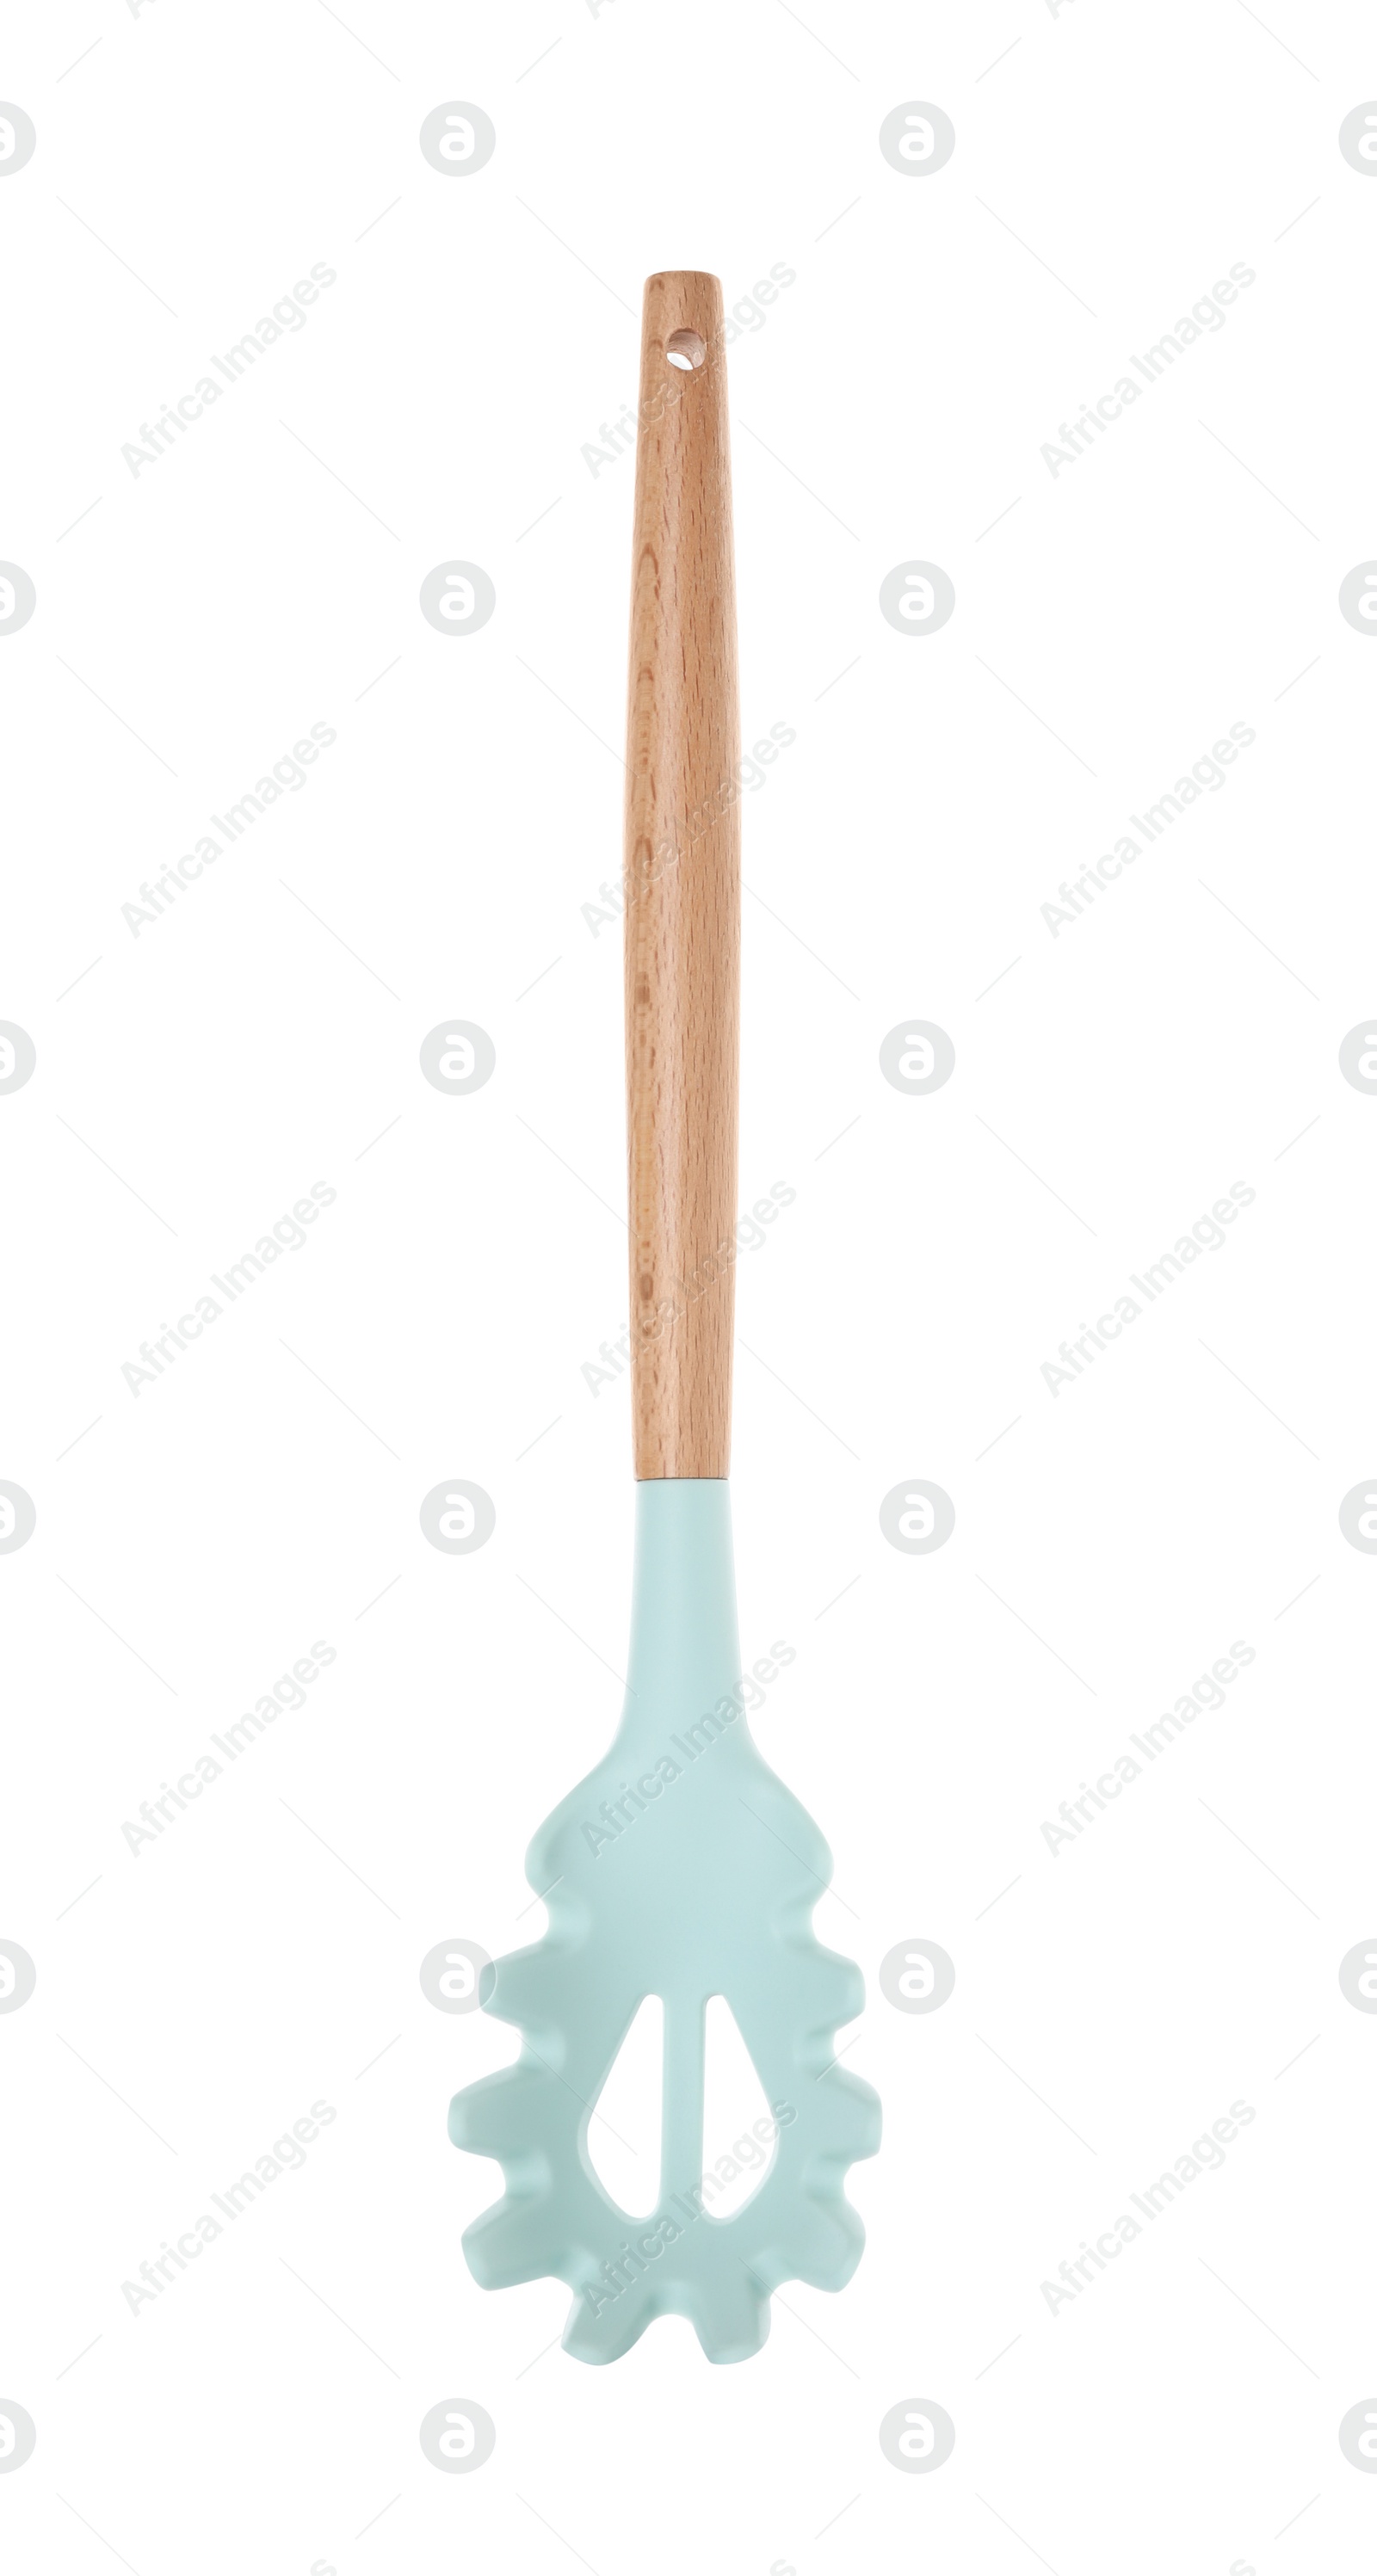 Photo of Pasta server with wooden handle isolated on white. Kitchen utensil